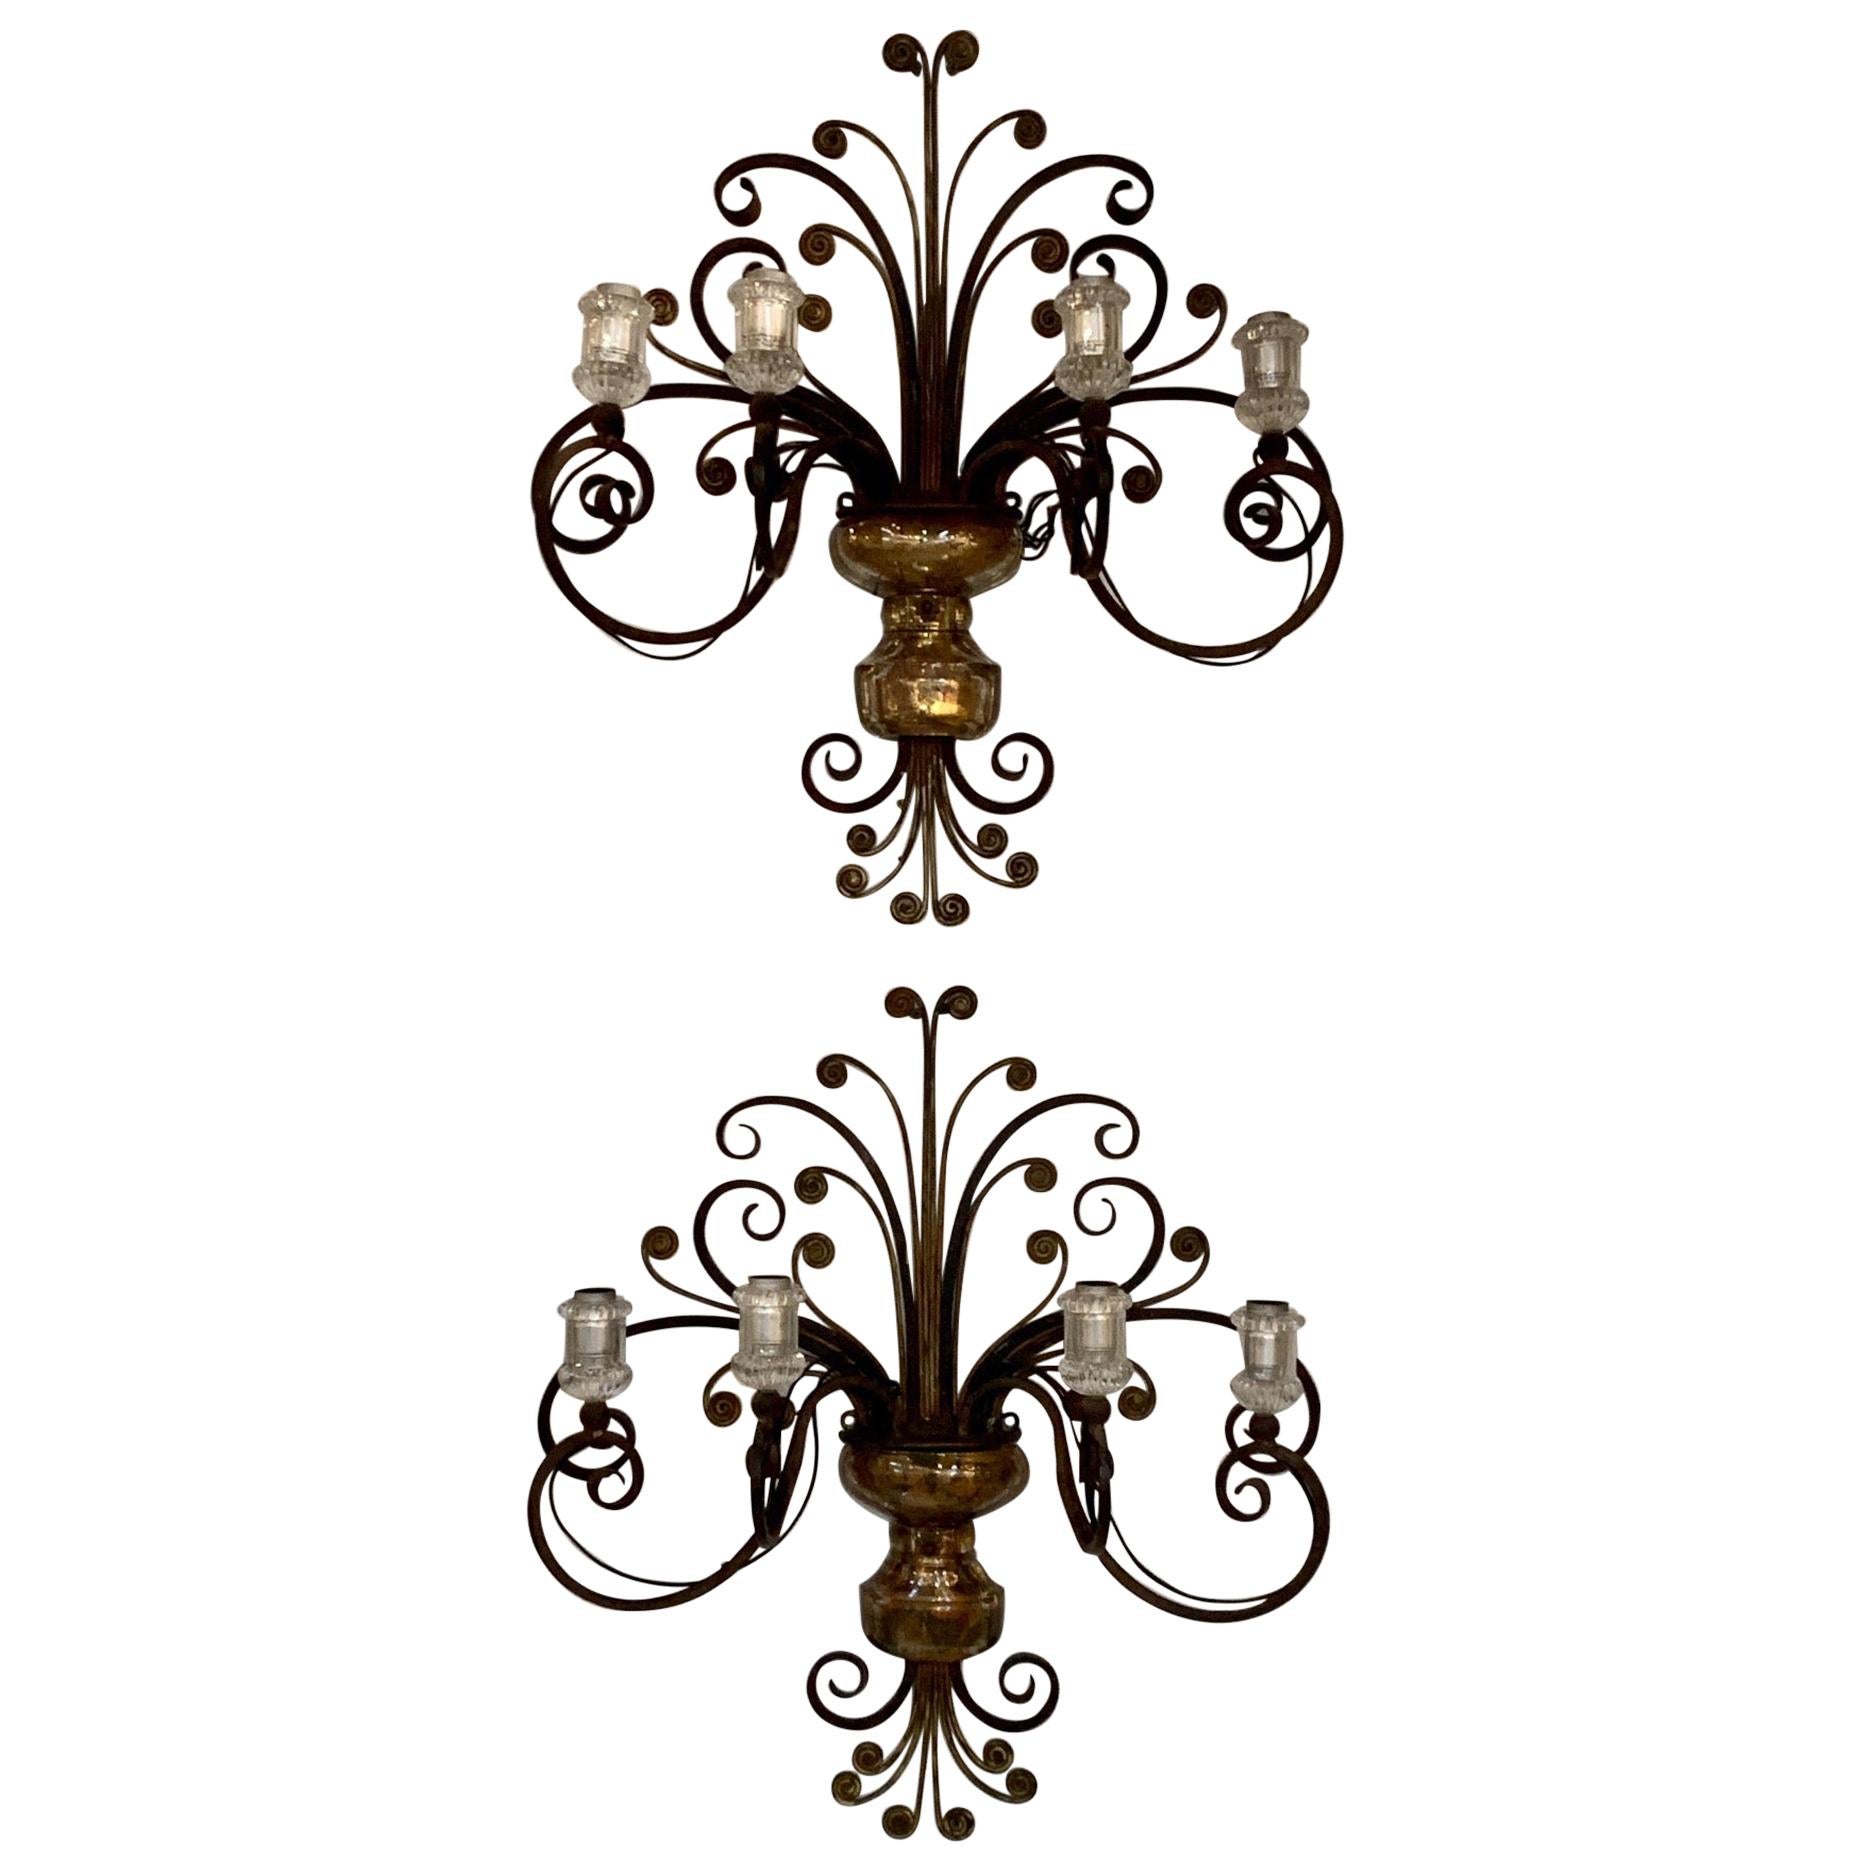 Pair of Vintage French Maison Baguès Iron and Foil Glass Wall Sconces